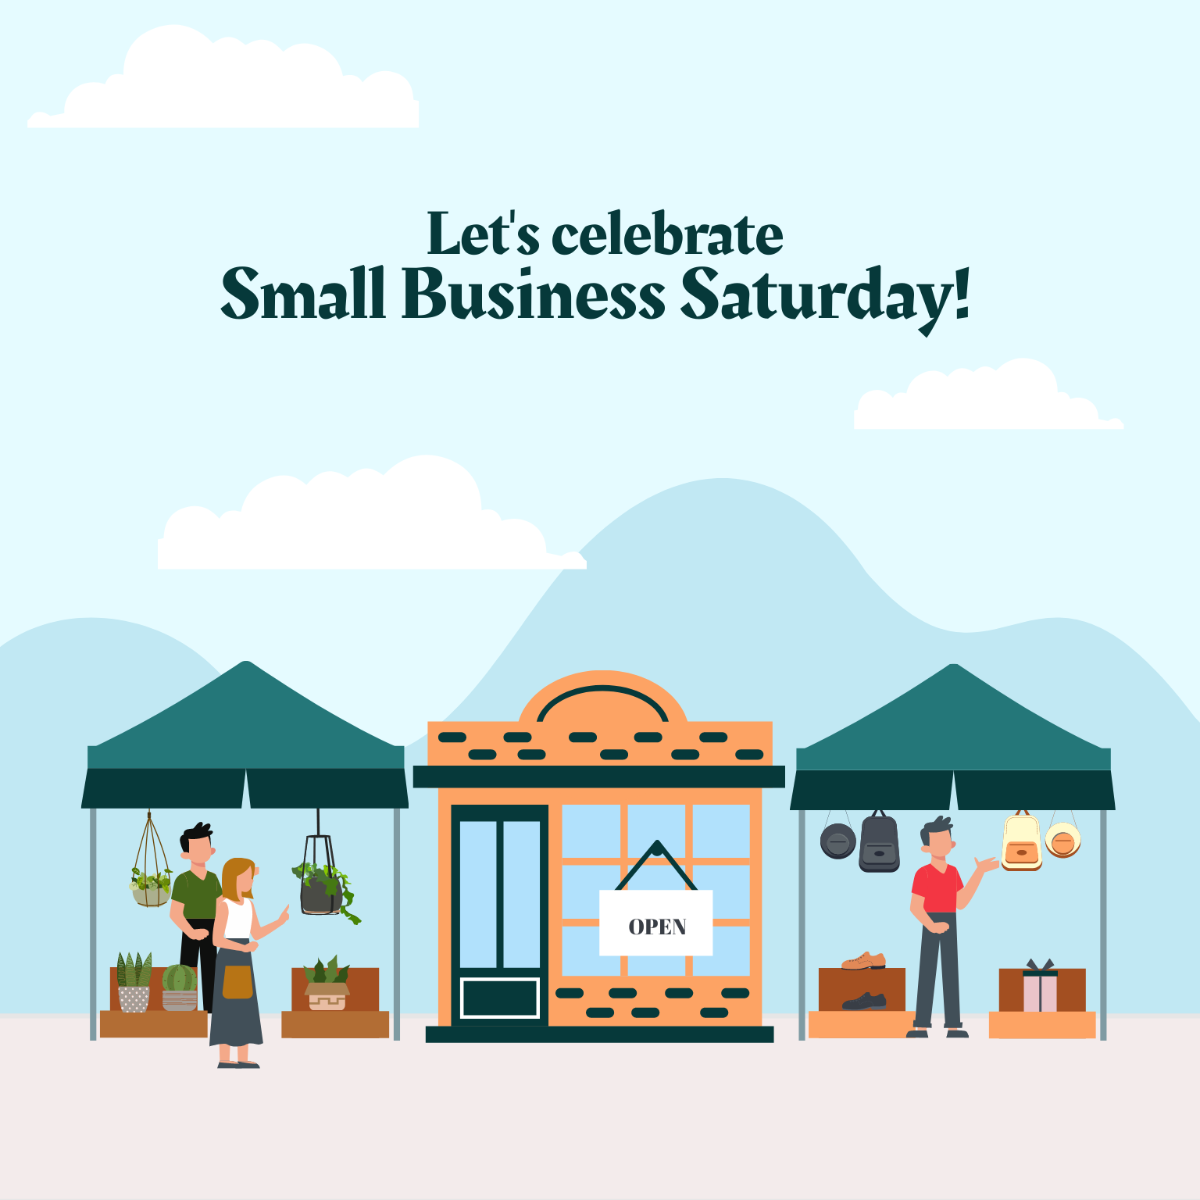 Small Business Saturday Celebration Vector Template